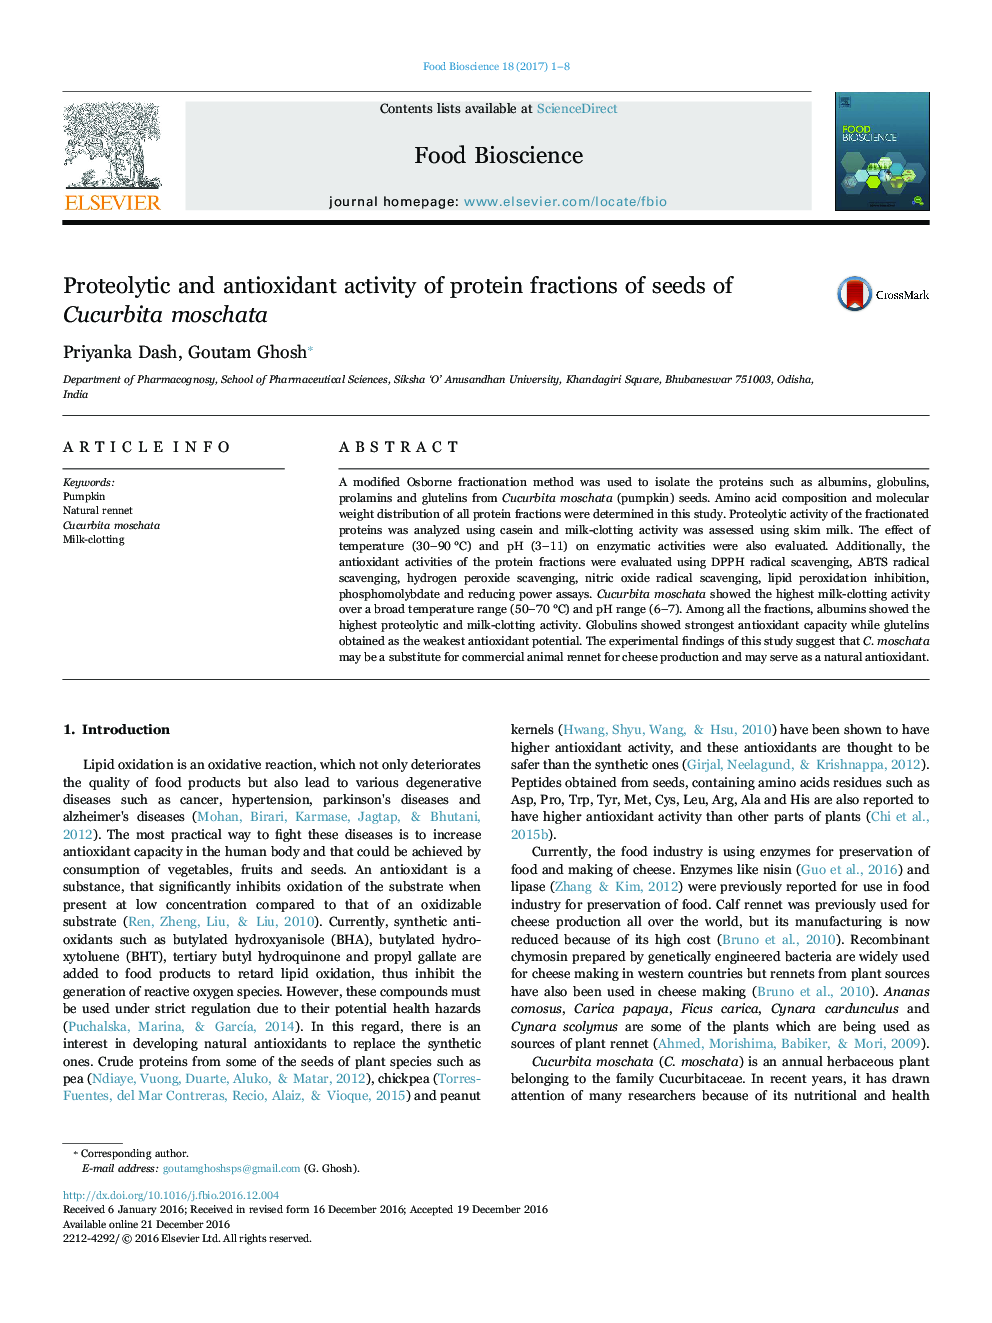 Proteolytic and antioxidant activity of protein fractions of seeds of Cucurbita moschata